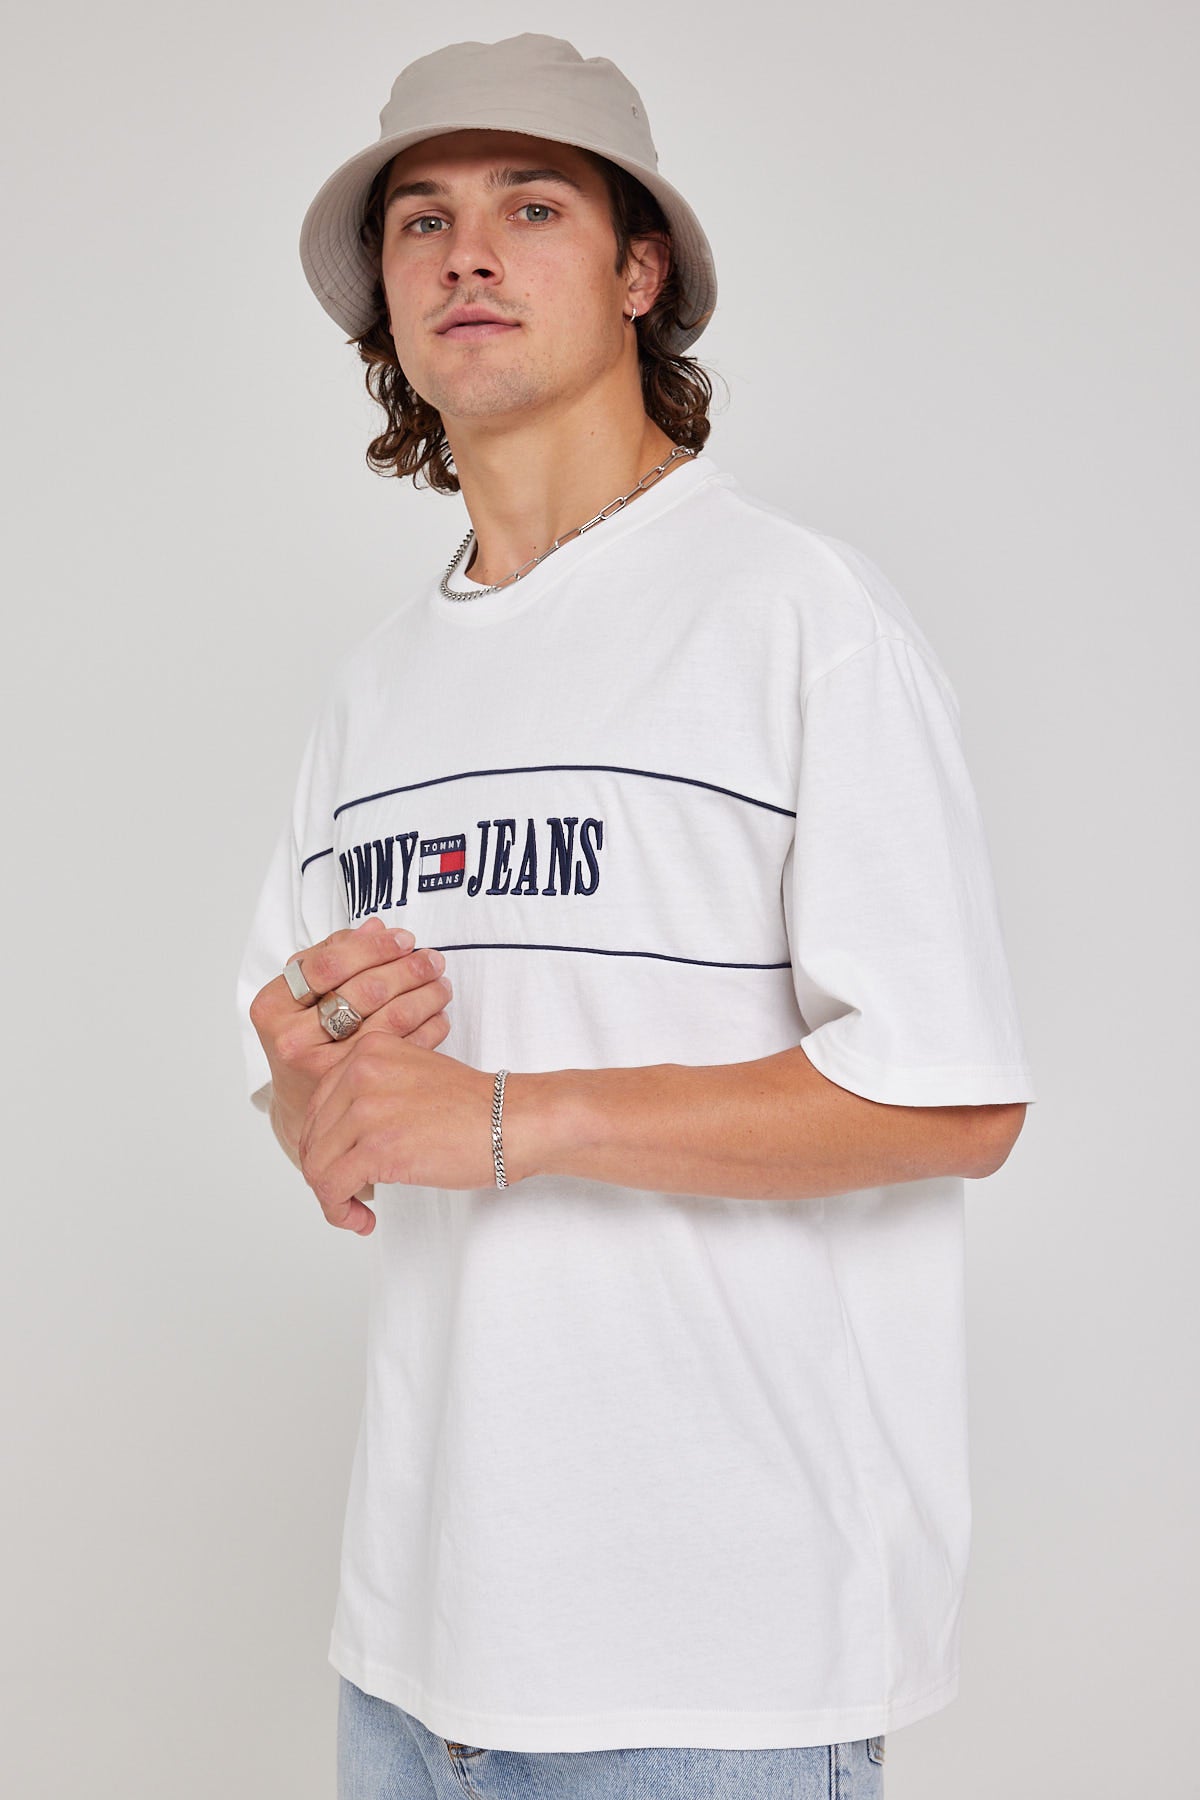 Tommy Jeans TJM Skate Archive Tee White